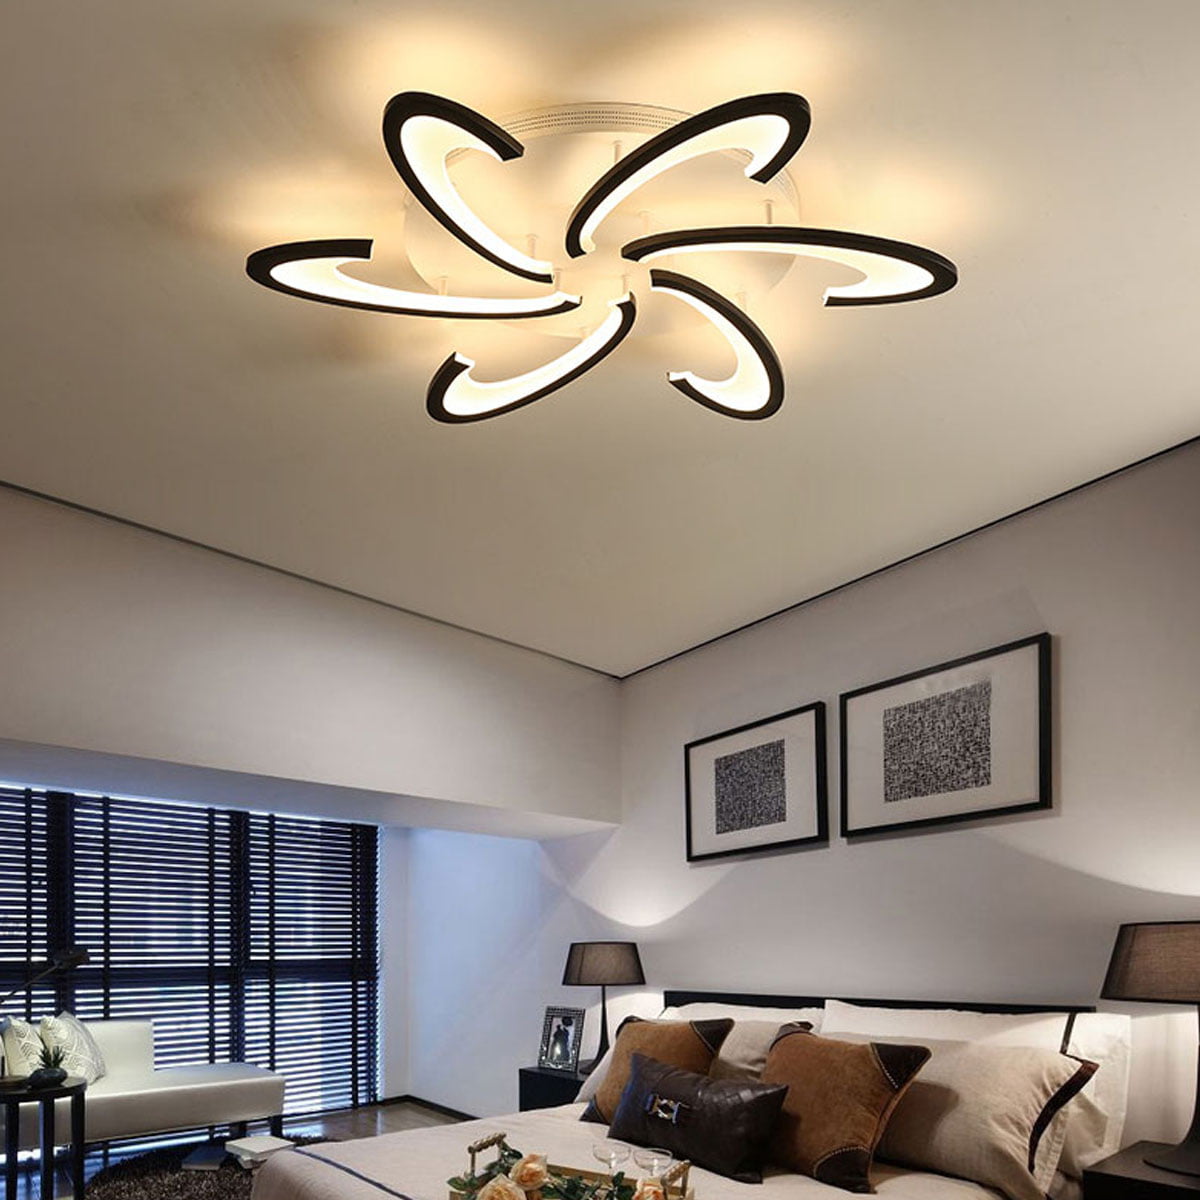 Dimmable/Not 3W LED Wall Mount Light Ceiling Lamp Fixture Modern Decor Lighting 